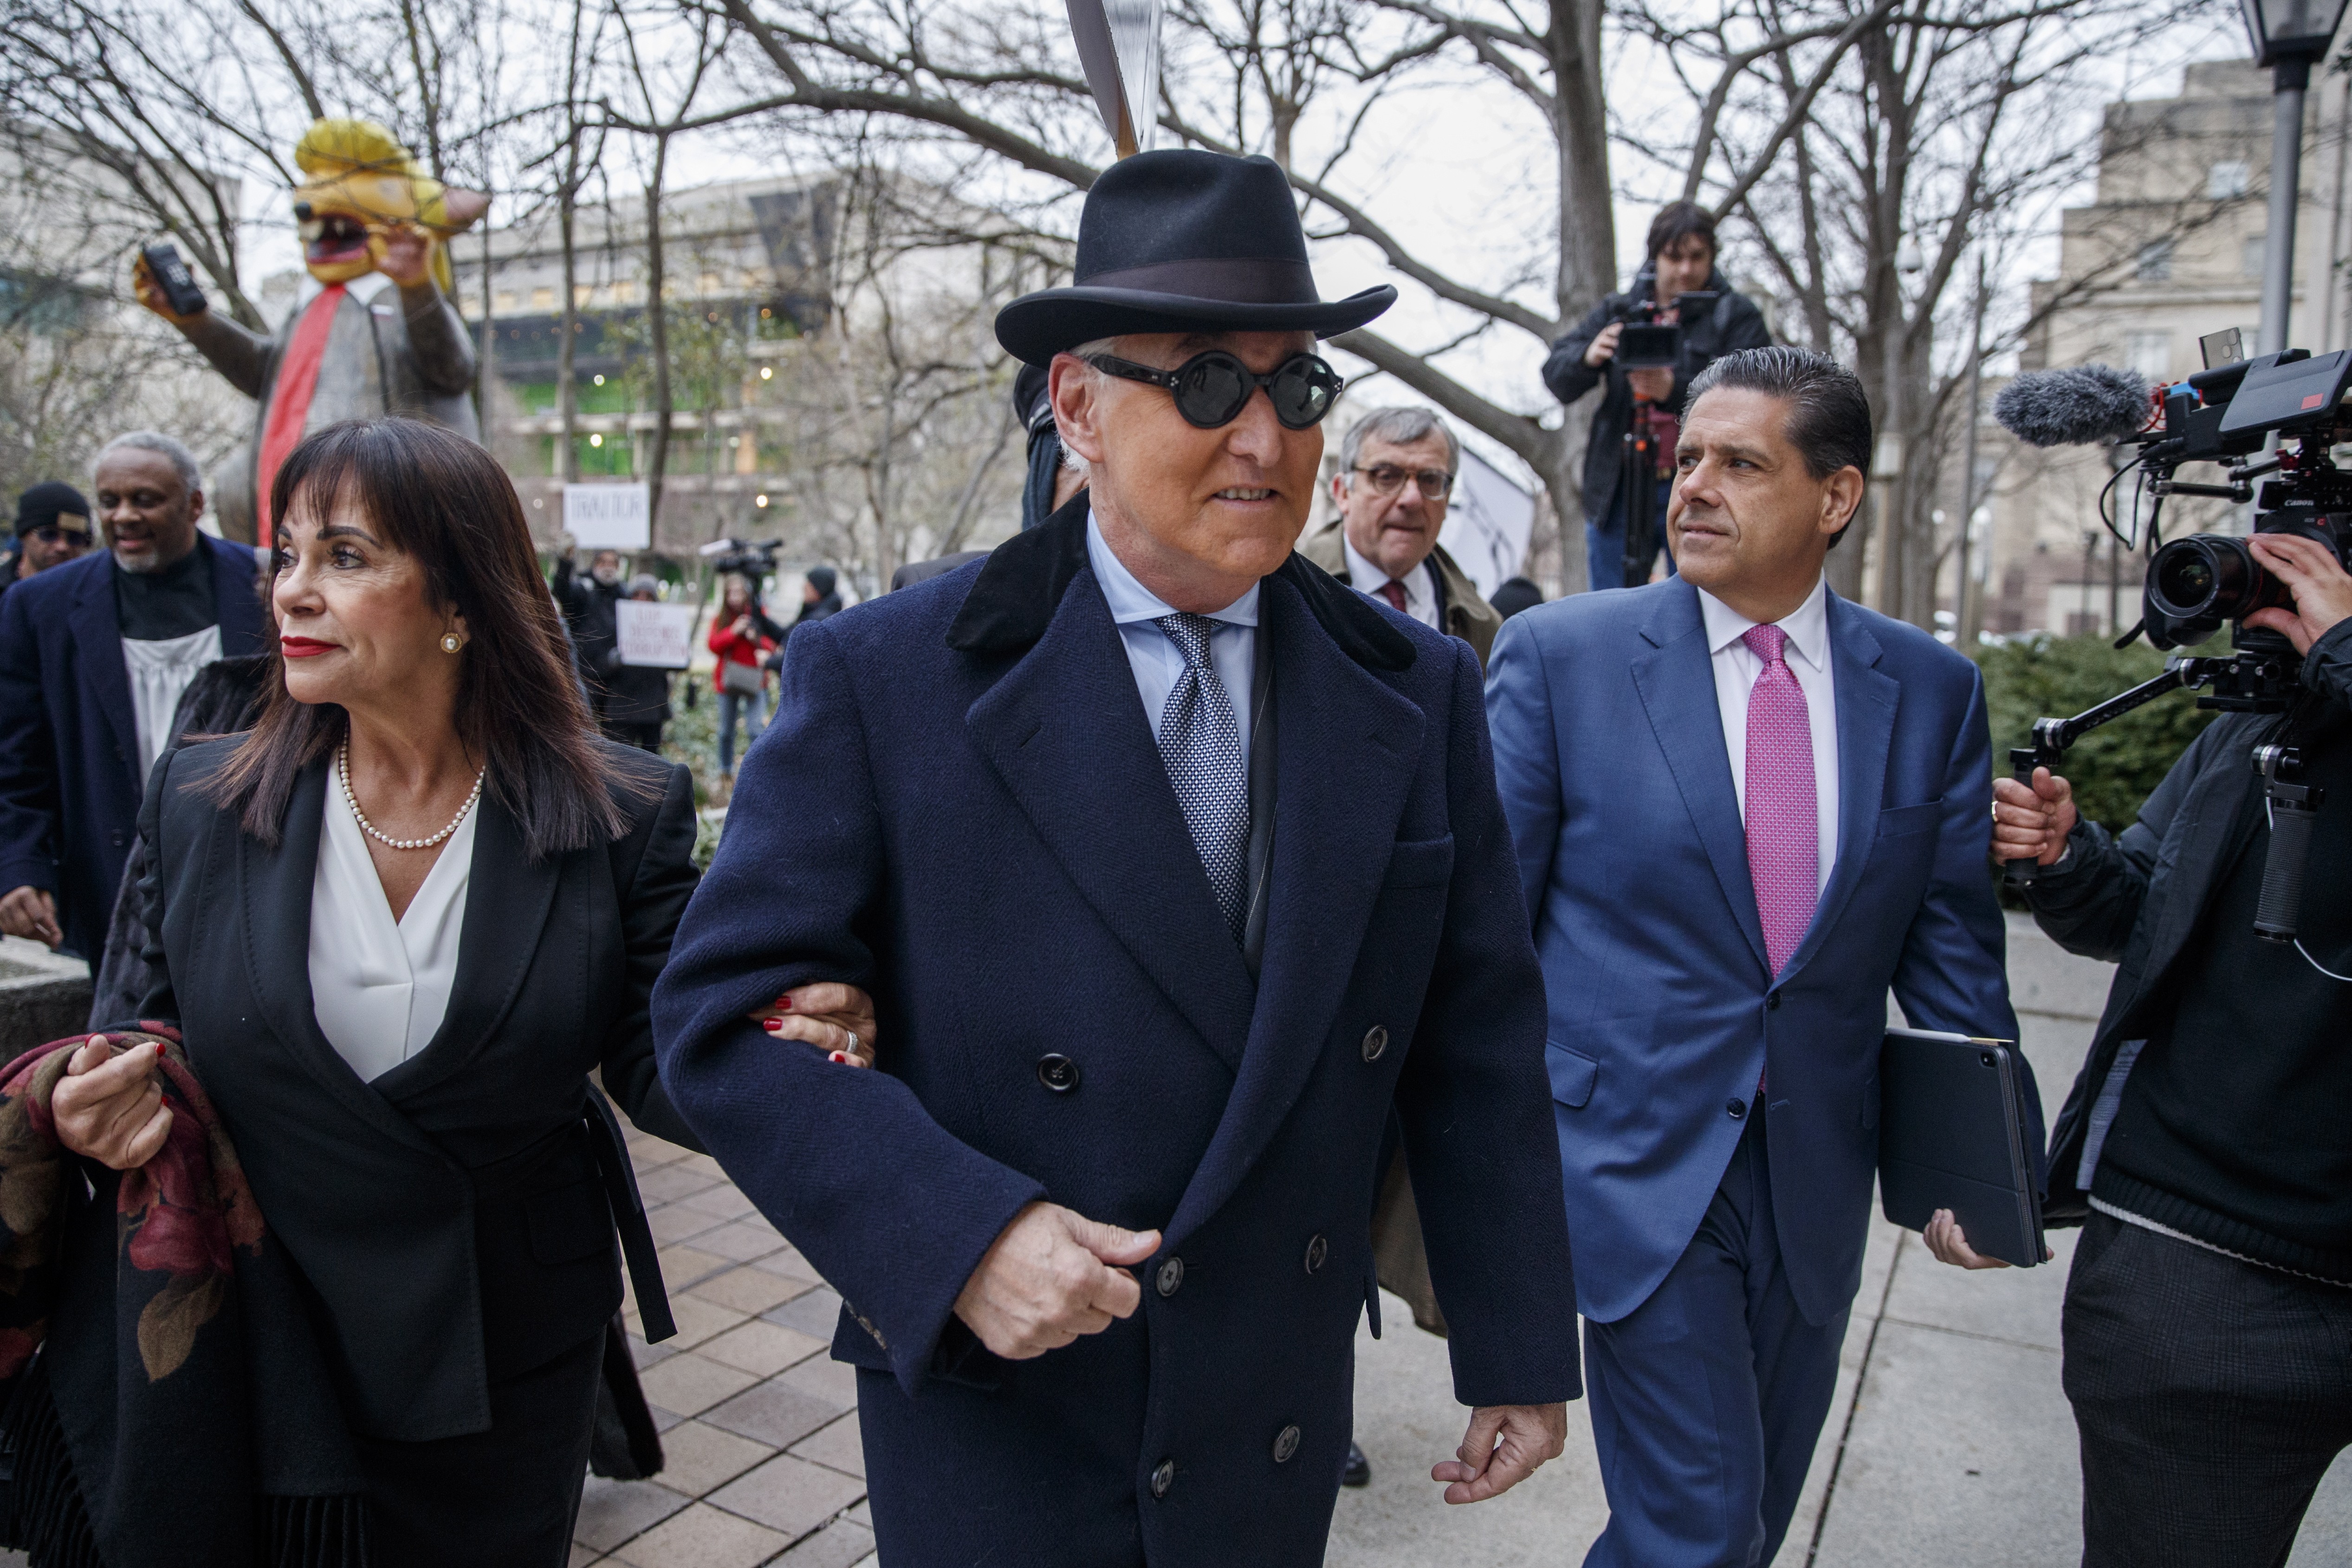 Roger Stone (centre) and his wife, Nydia (left), arrive for his sentencing hearing in Washington on Thursday. Photo: EPA-EFE